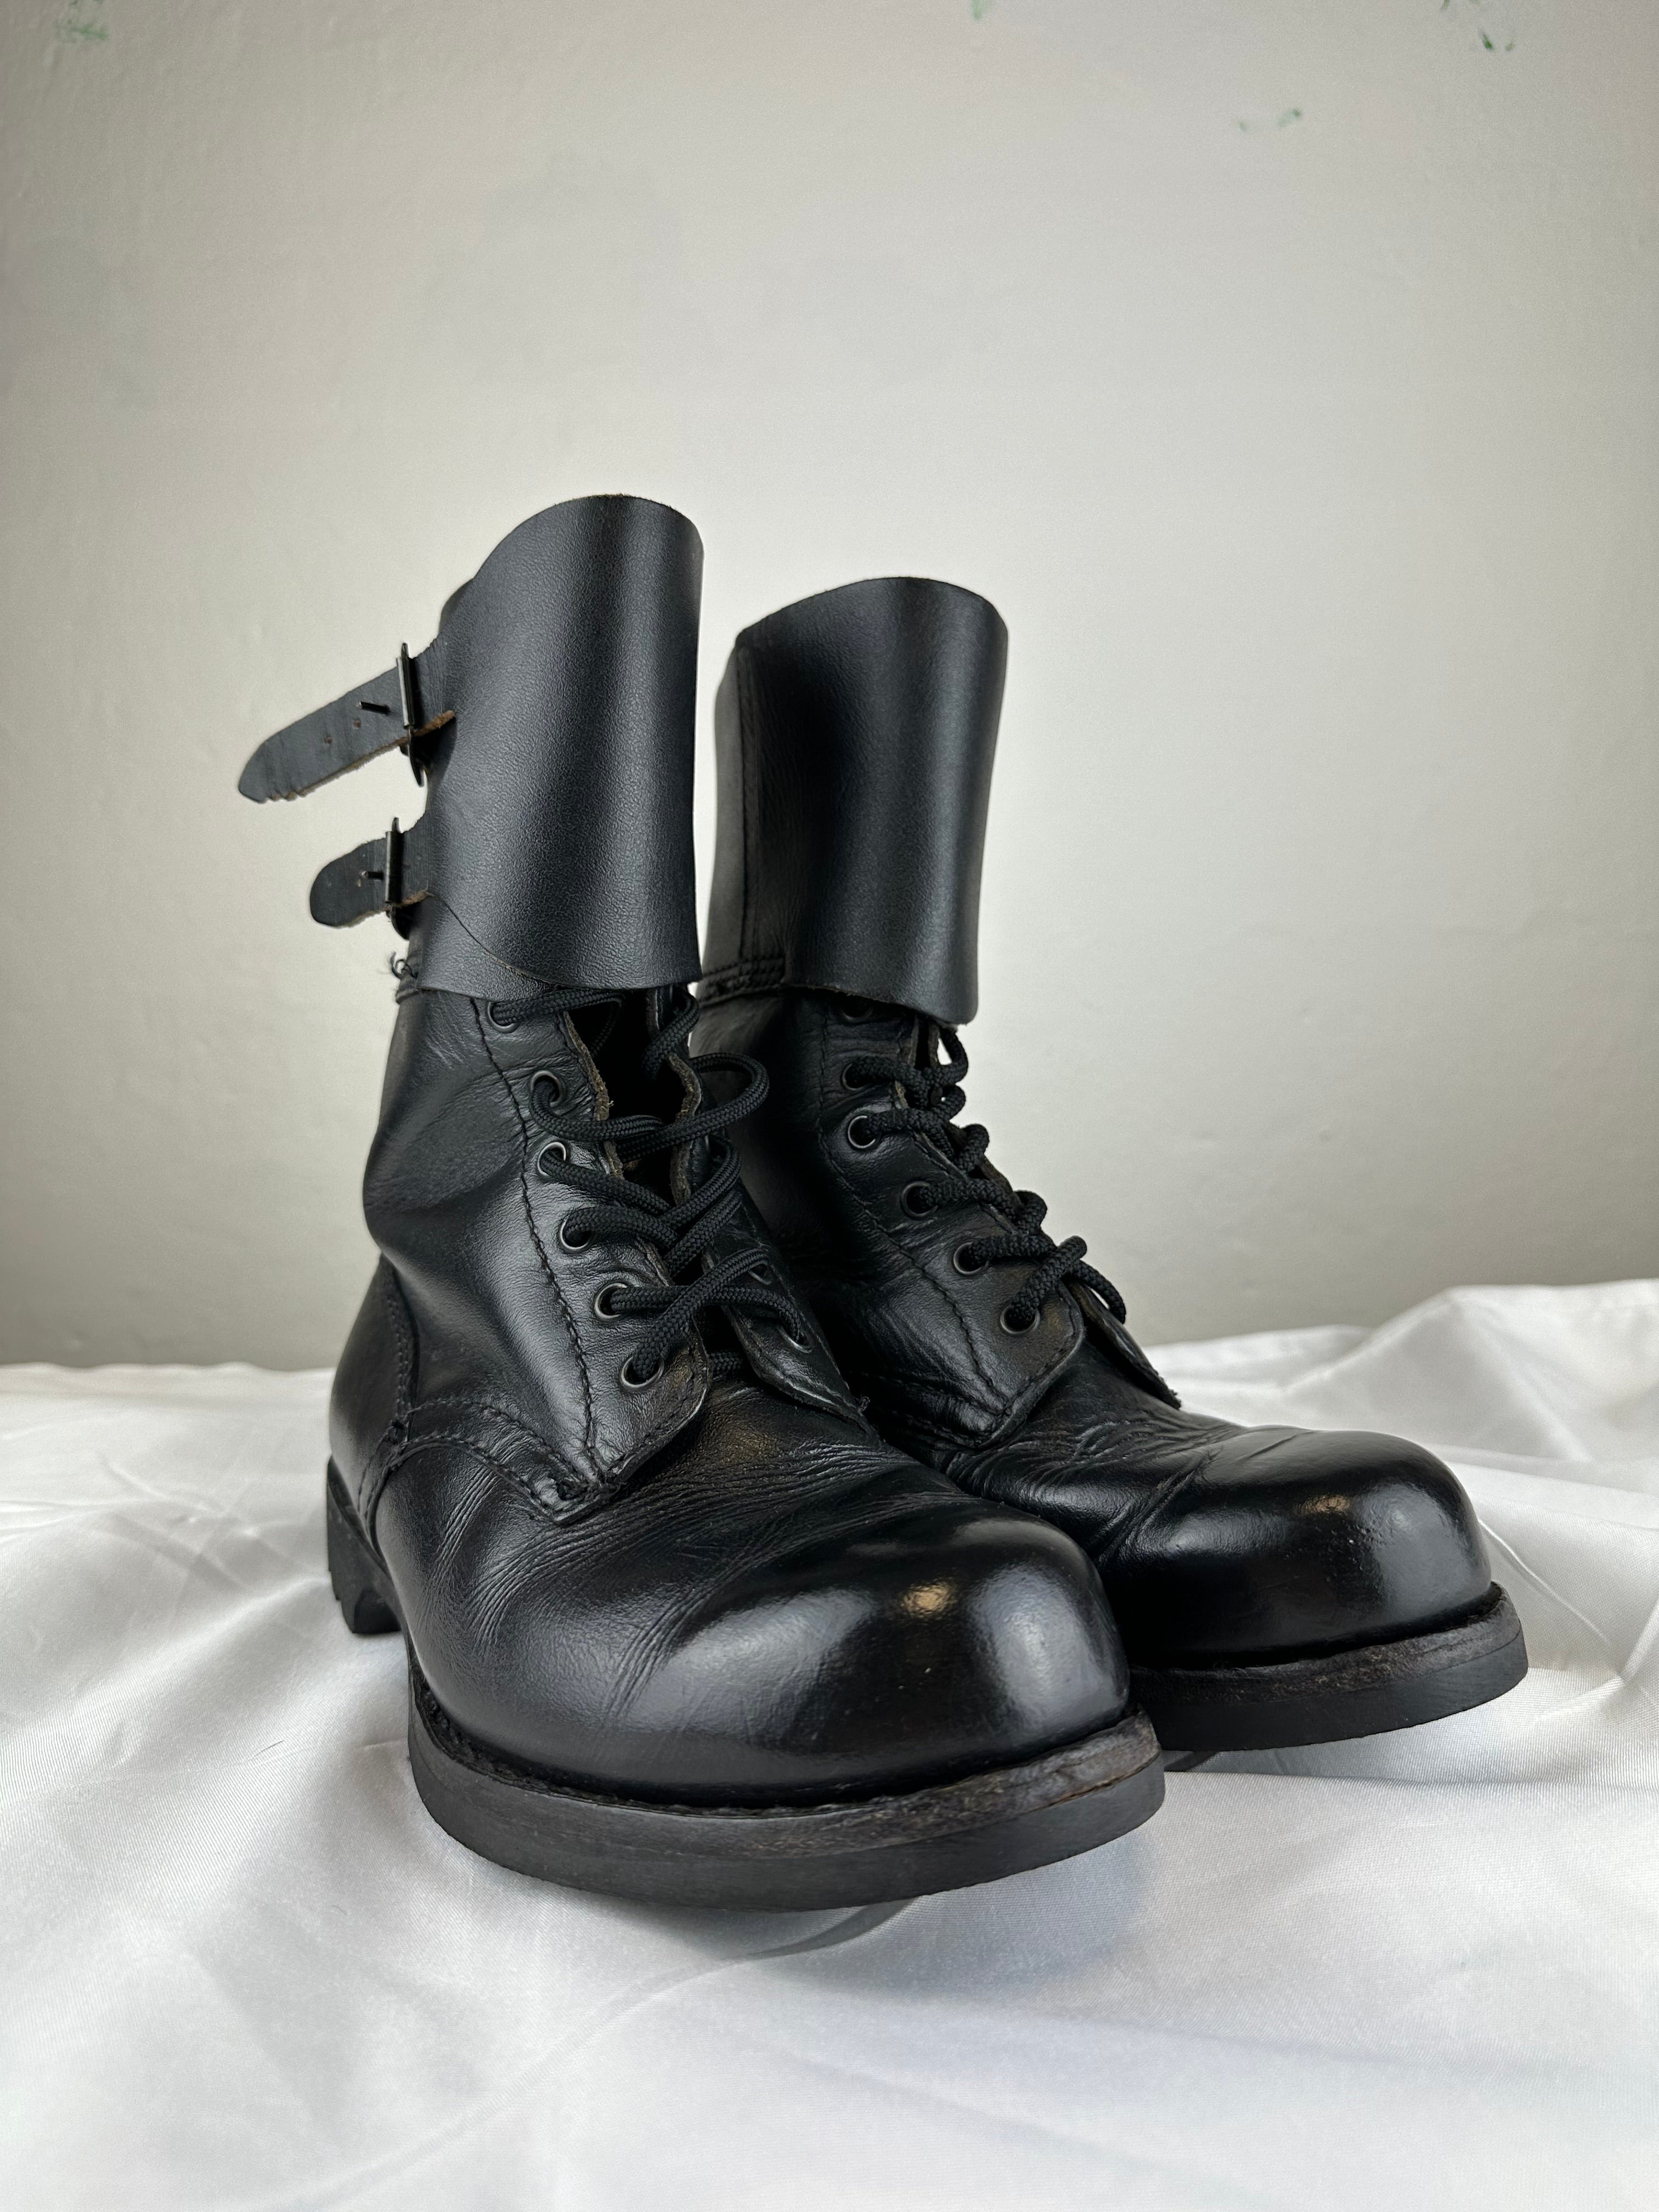 Vintage 1980s Military Boots - size 41